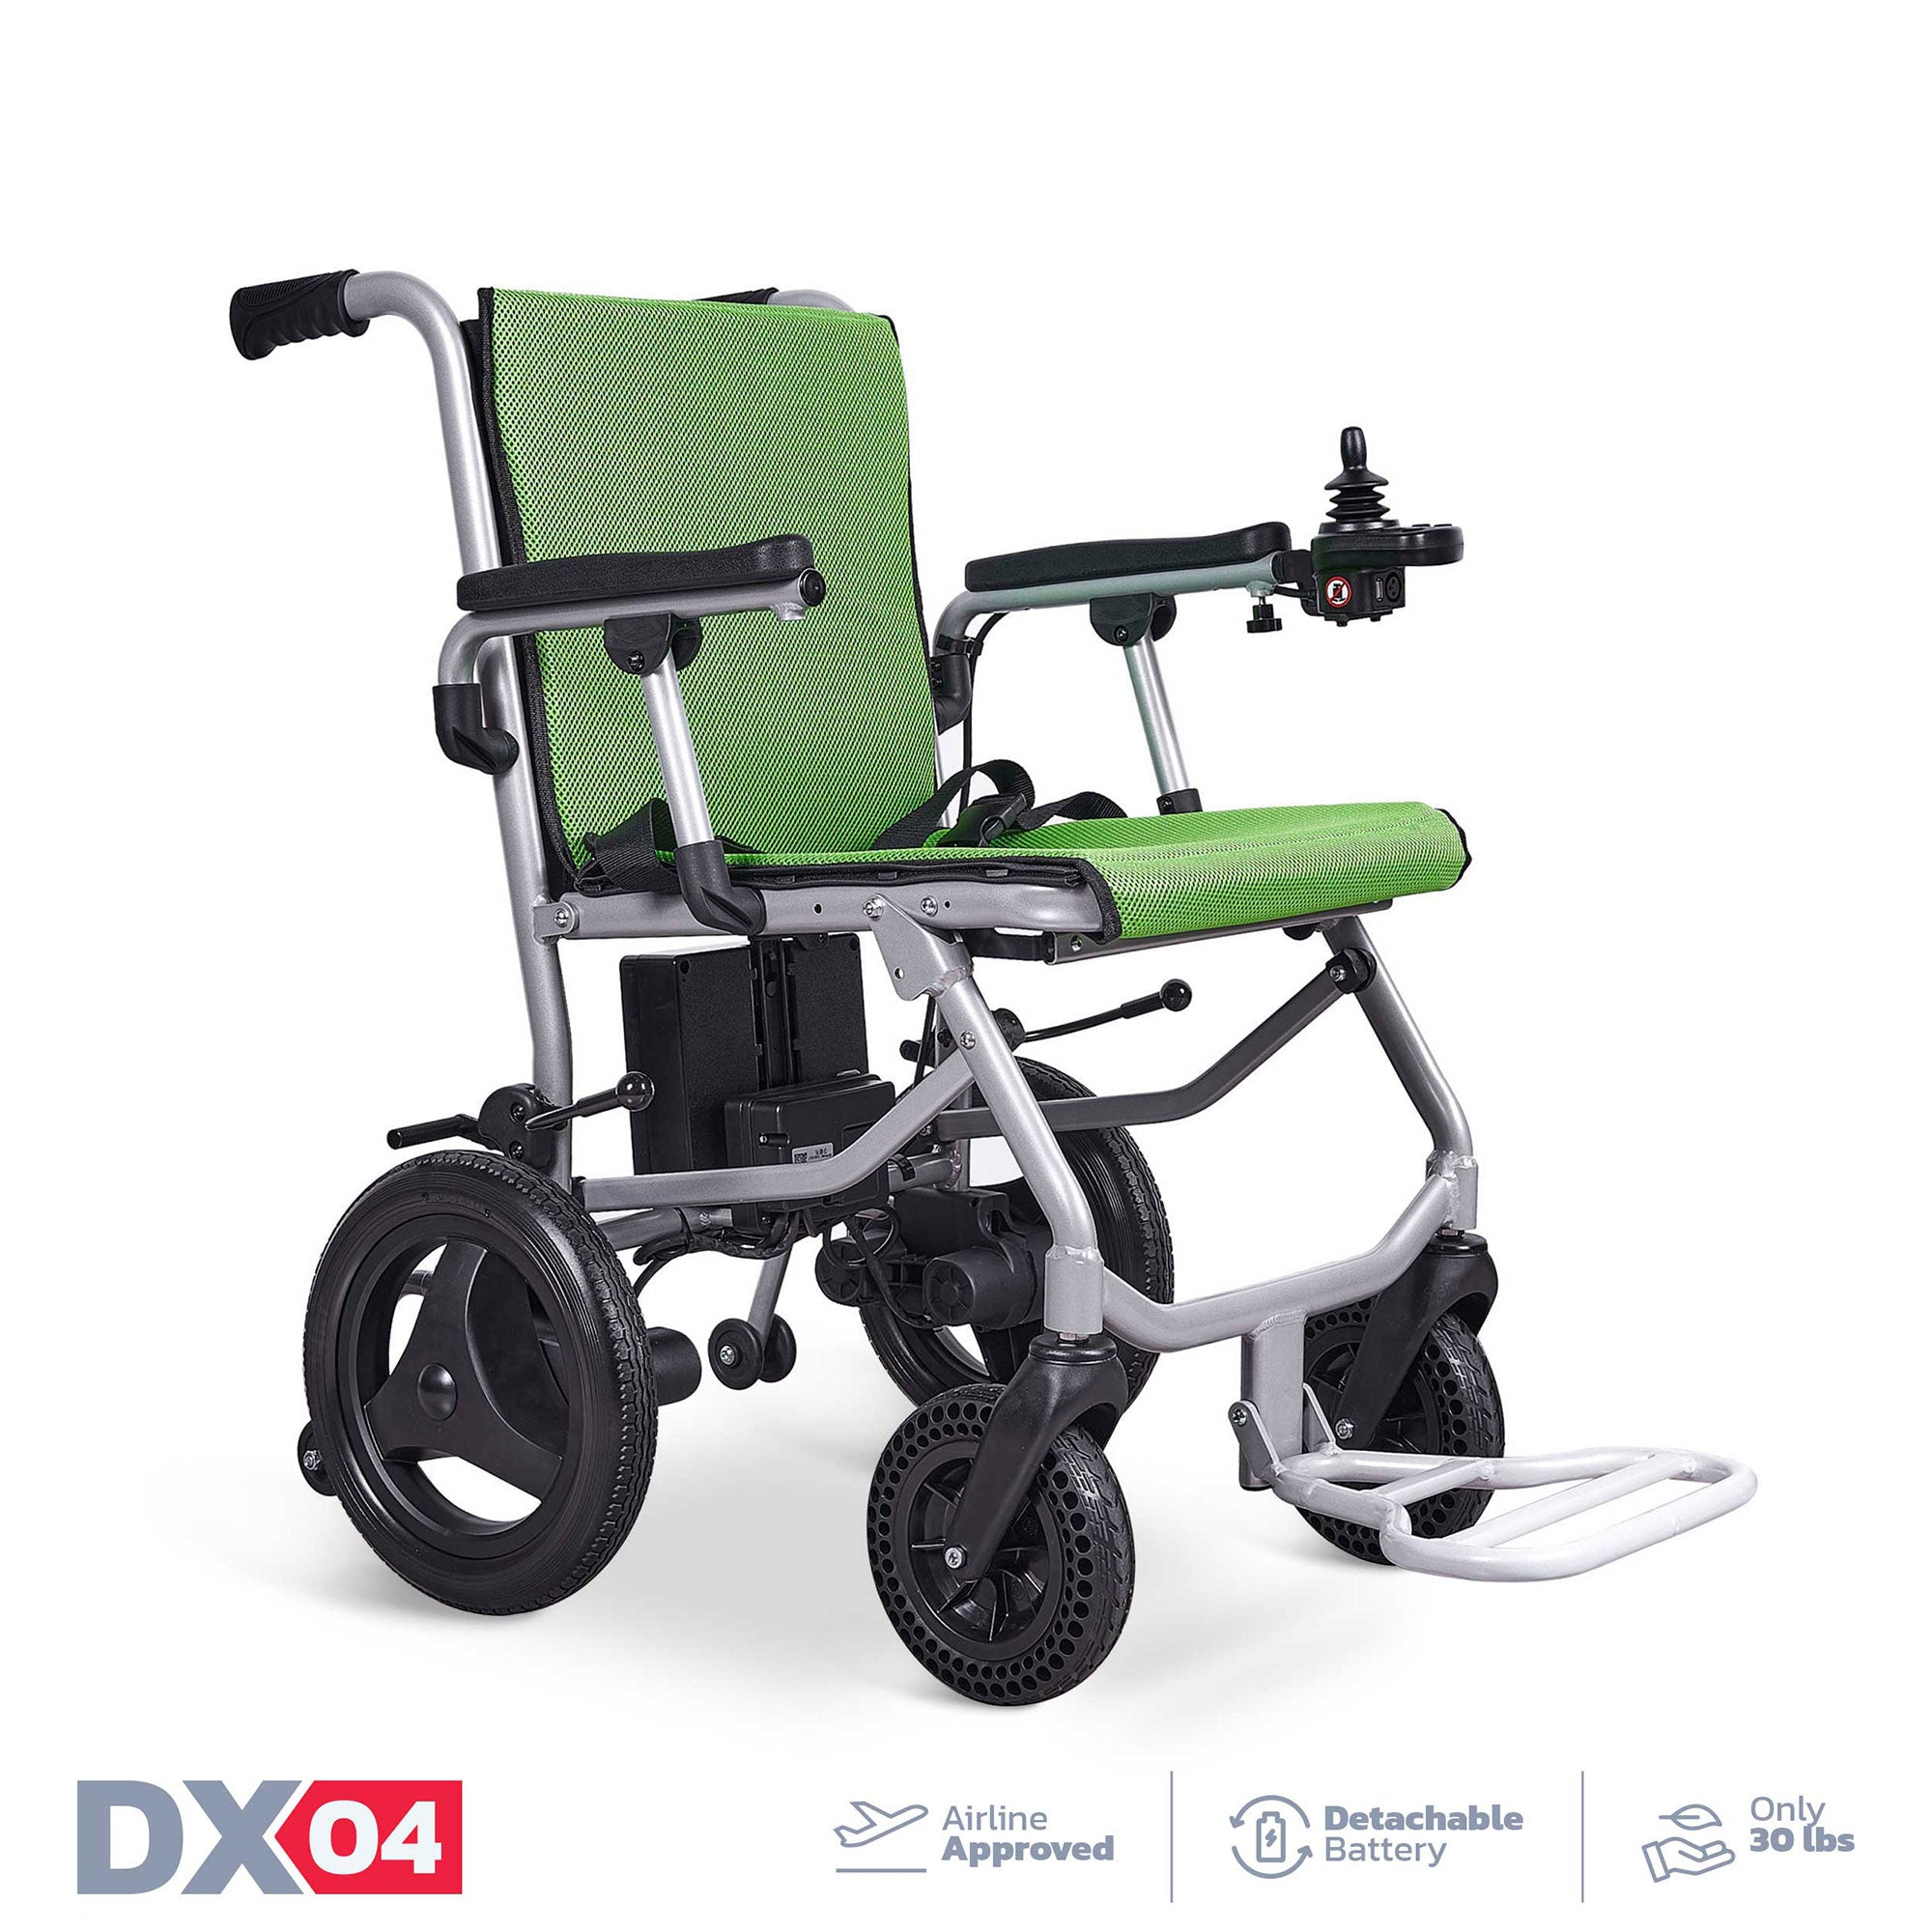 Rubicon DX04 - The World's Lightest Electric Wheelchair